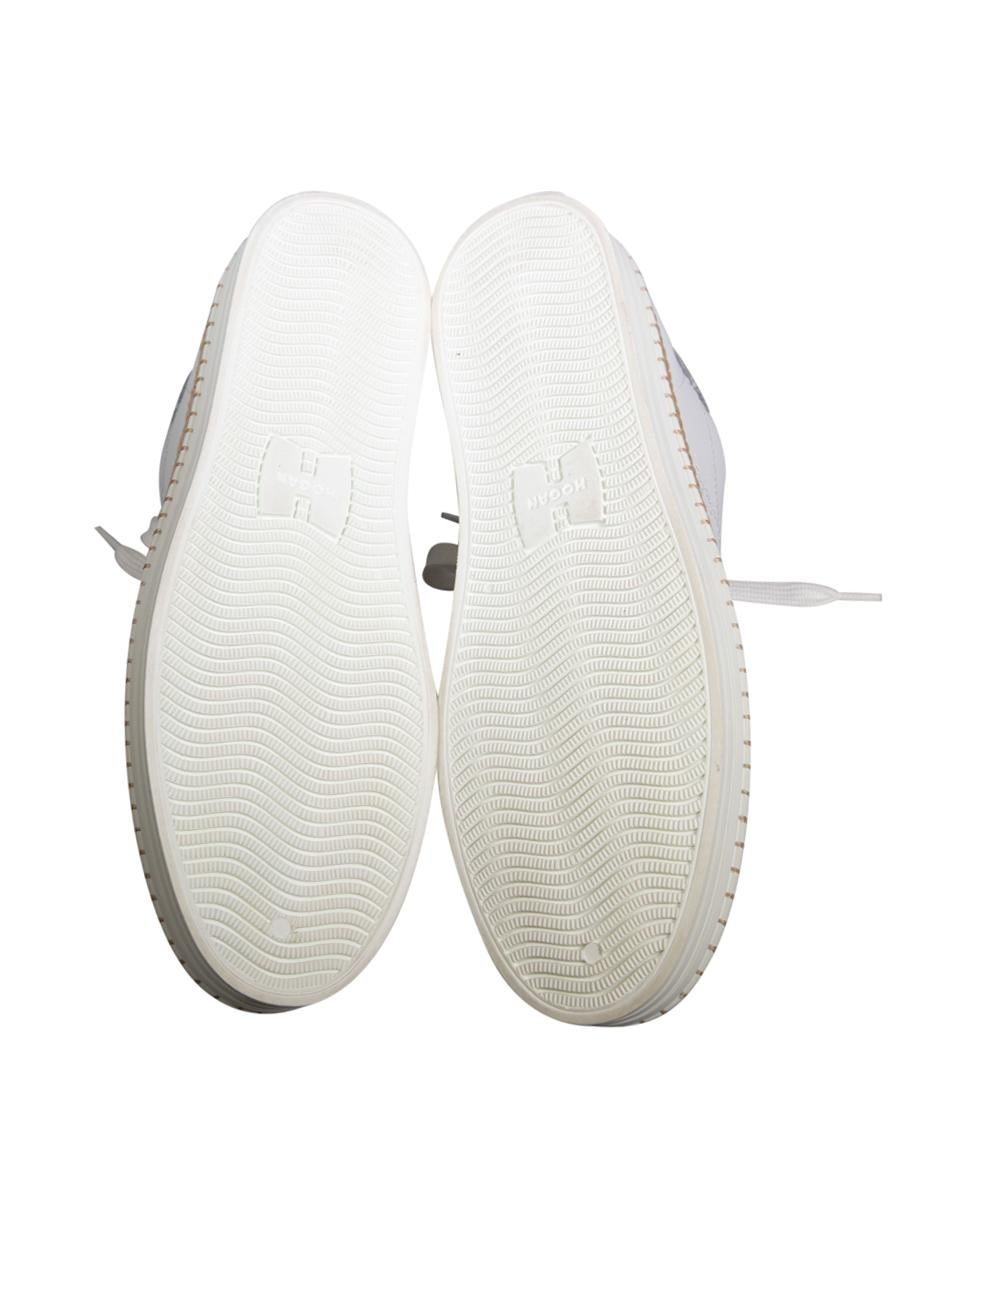 Women's Hogan White Leather R260 Stitched Sole Perforated Trainers Size EU 40 For Sale